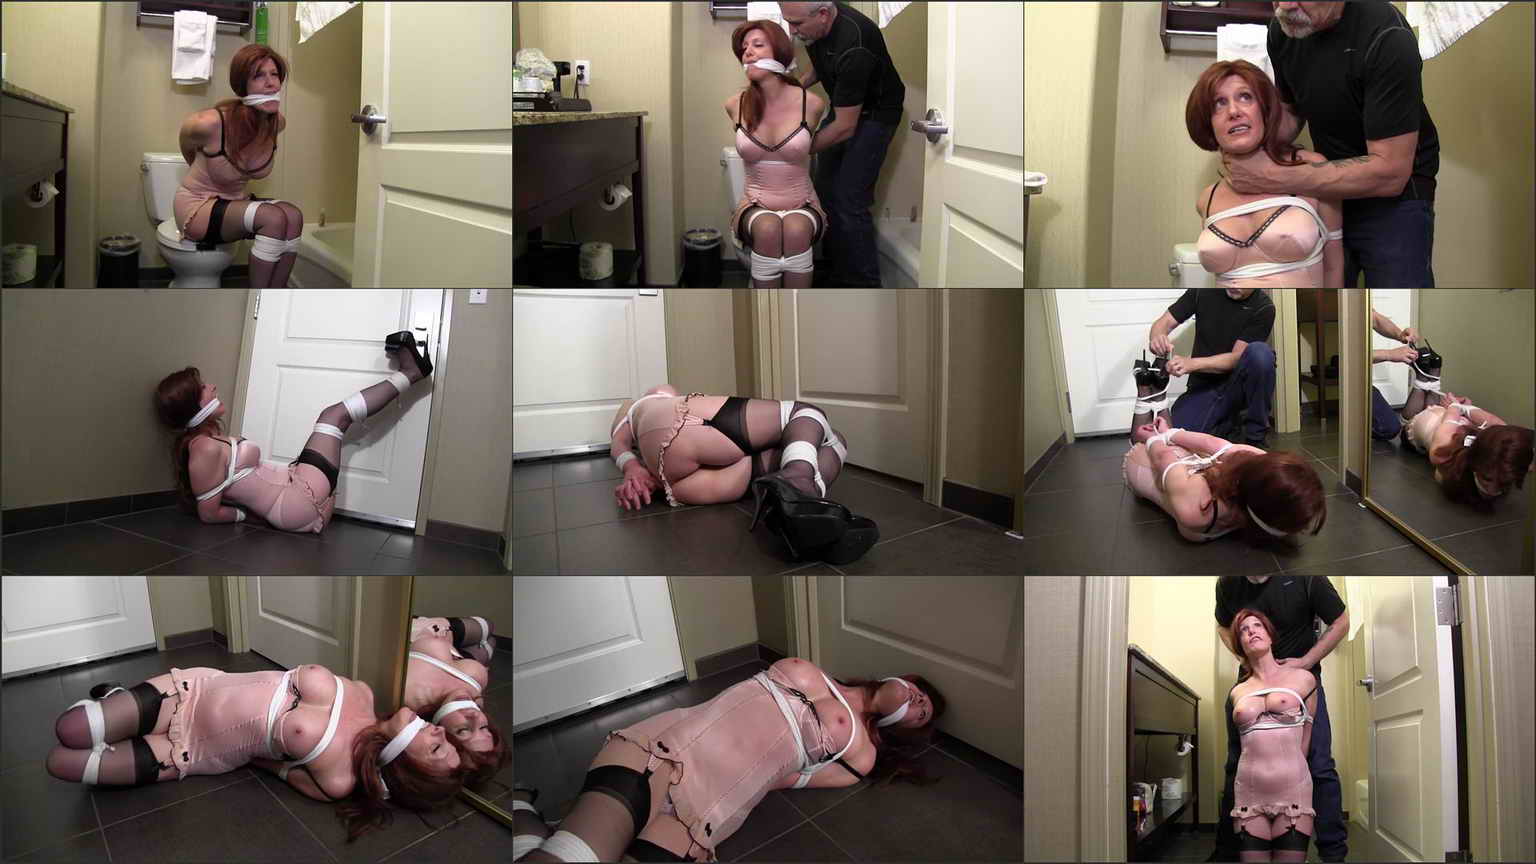 olderwomentied] Cheating Wife cooling her big tits tied up, gagged and bent over the bathroom sink [MILF Cheeky Little Toy, bondage, rope] at Bondage